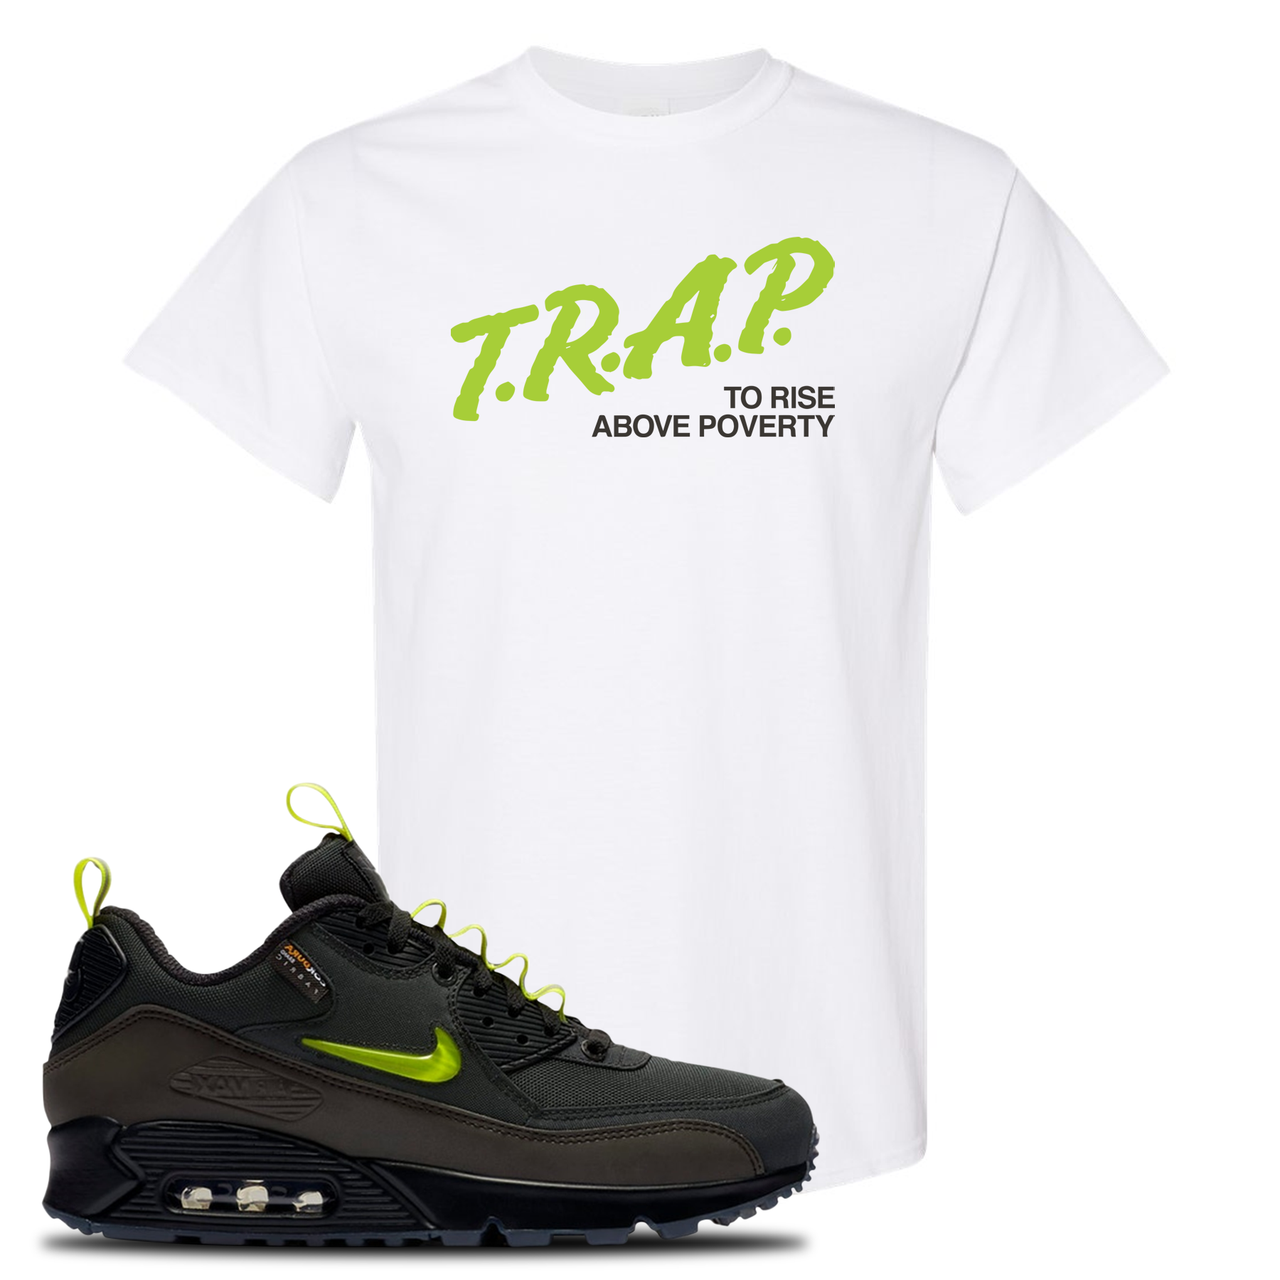 The Basement X Air Max 90 Manchester Trap to Rise Above Poverty White Sneaker Hook Up T-Shirt